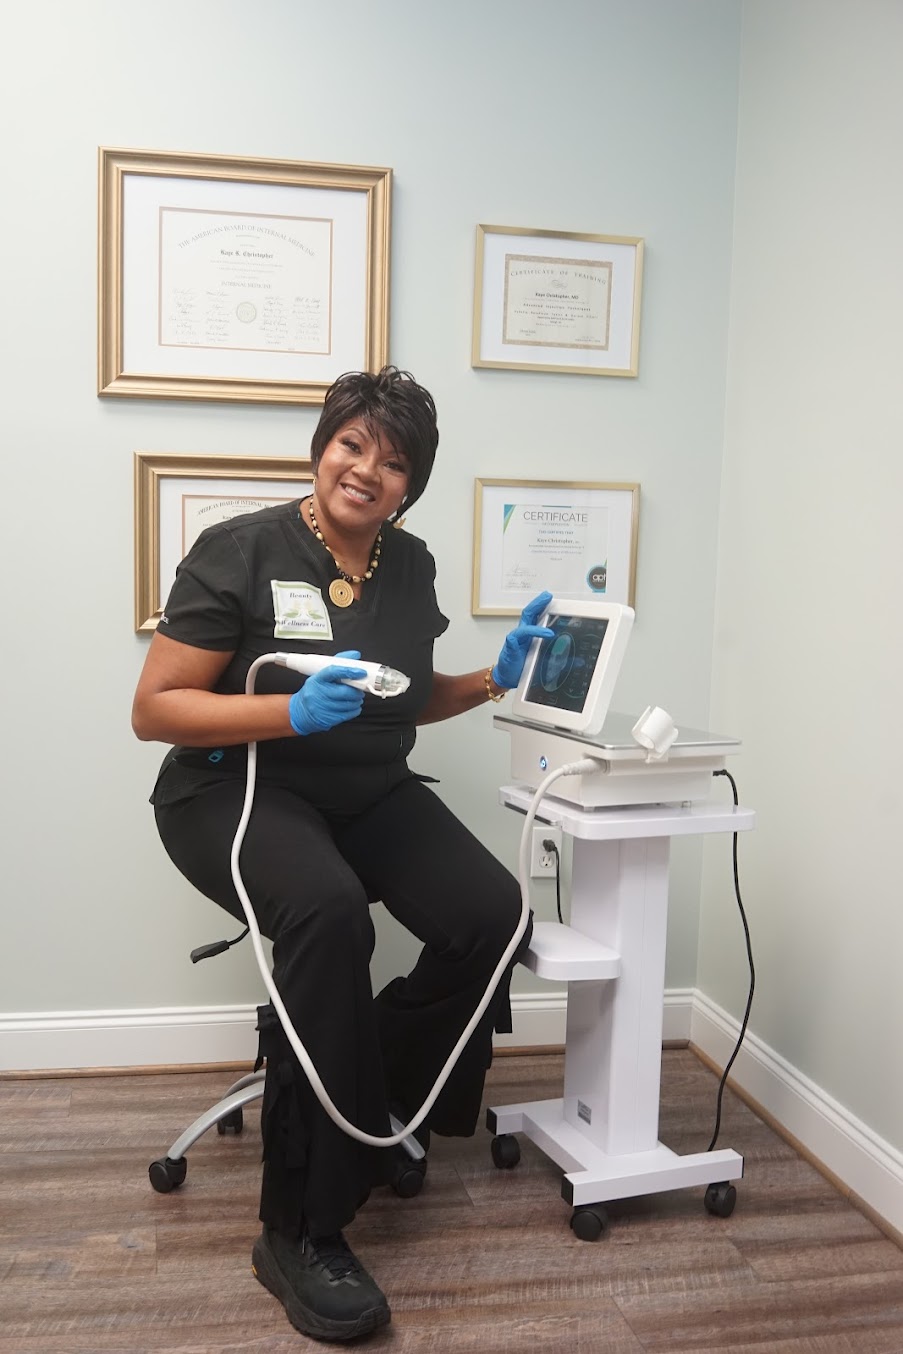 Beauty & Wellness Care is based in Greenville South Carolina Beauty & Wellness Care | Dr. Kaye Christopher, MD | Greenville, SC Greenville (843)806-3994